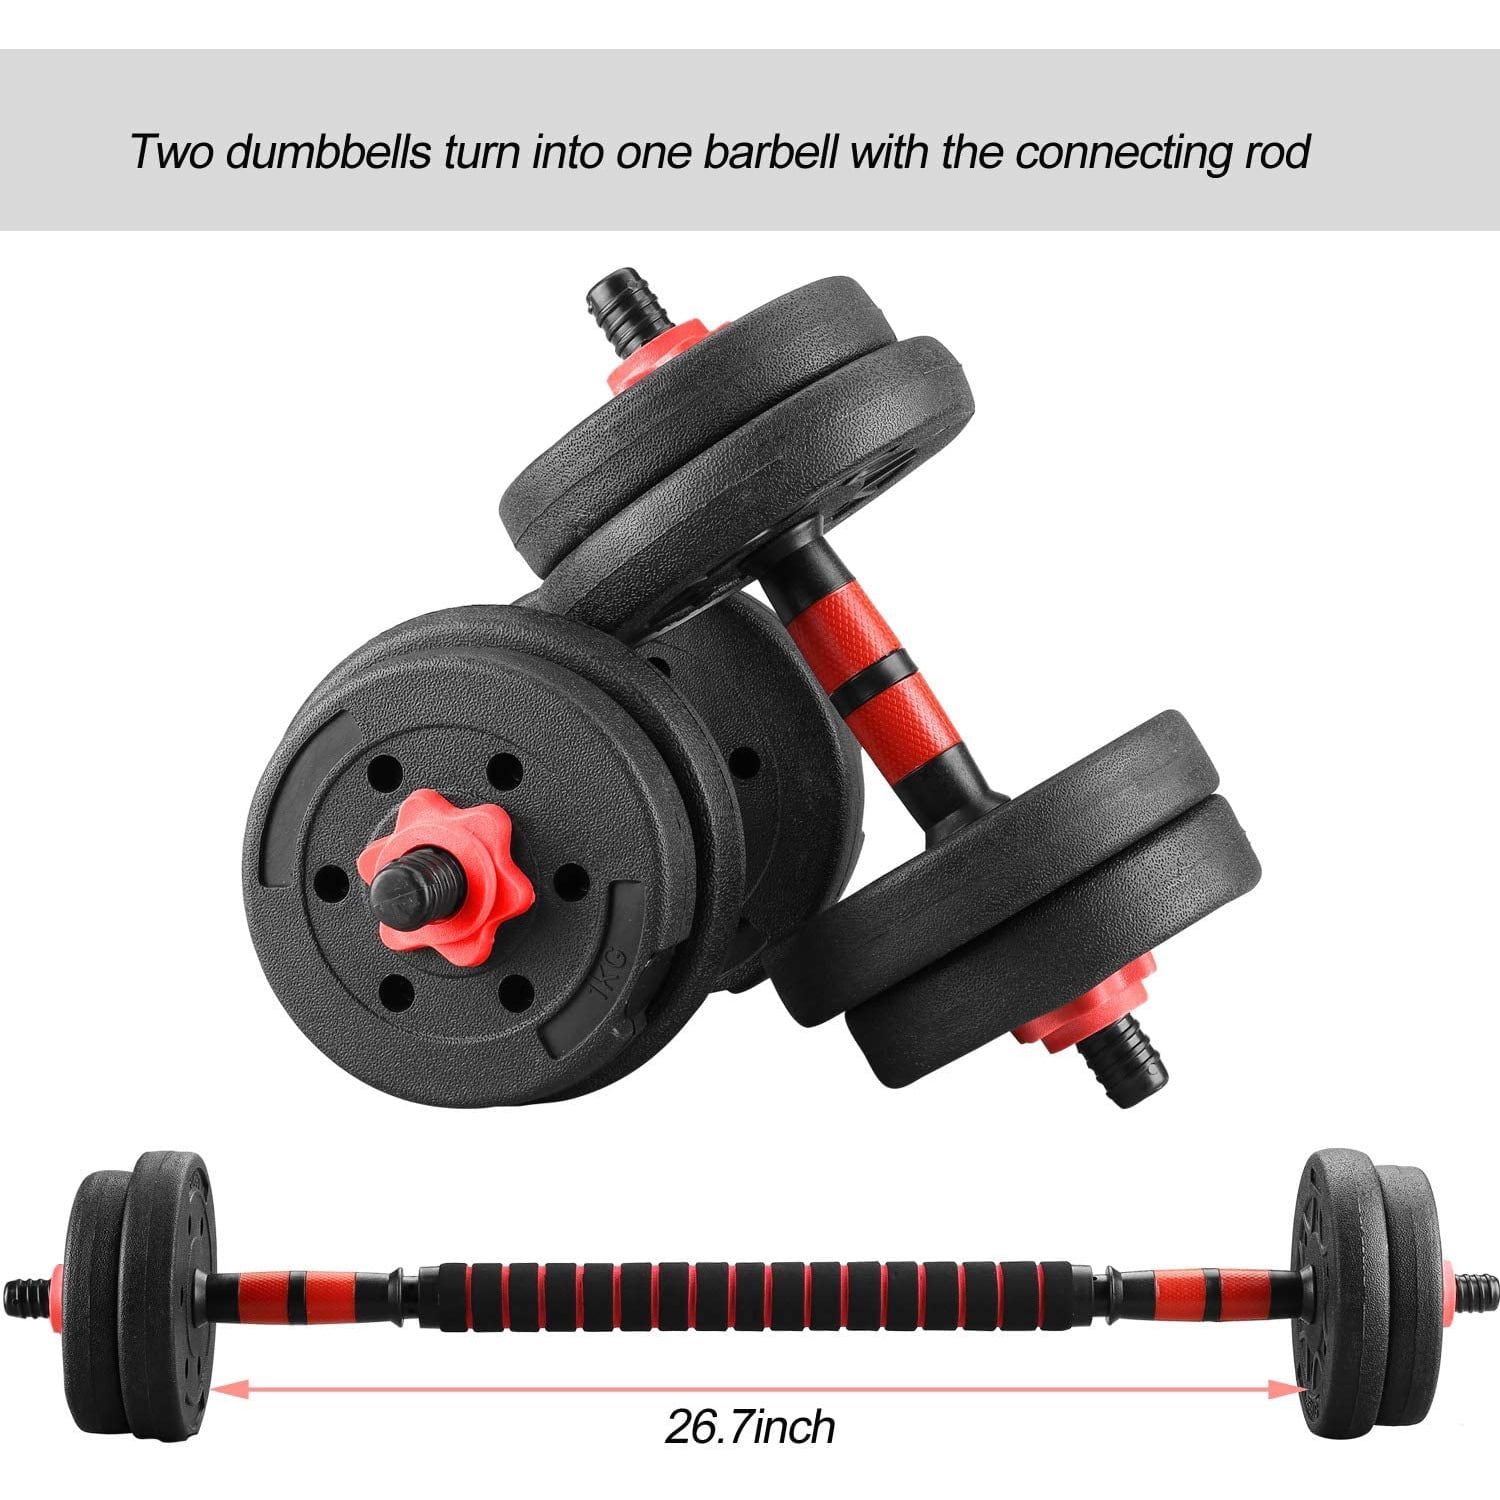 Totall 66/88/110LB Weight Dumbbell Set Adjustable Gym Barbell Plate Body Workout